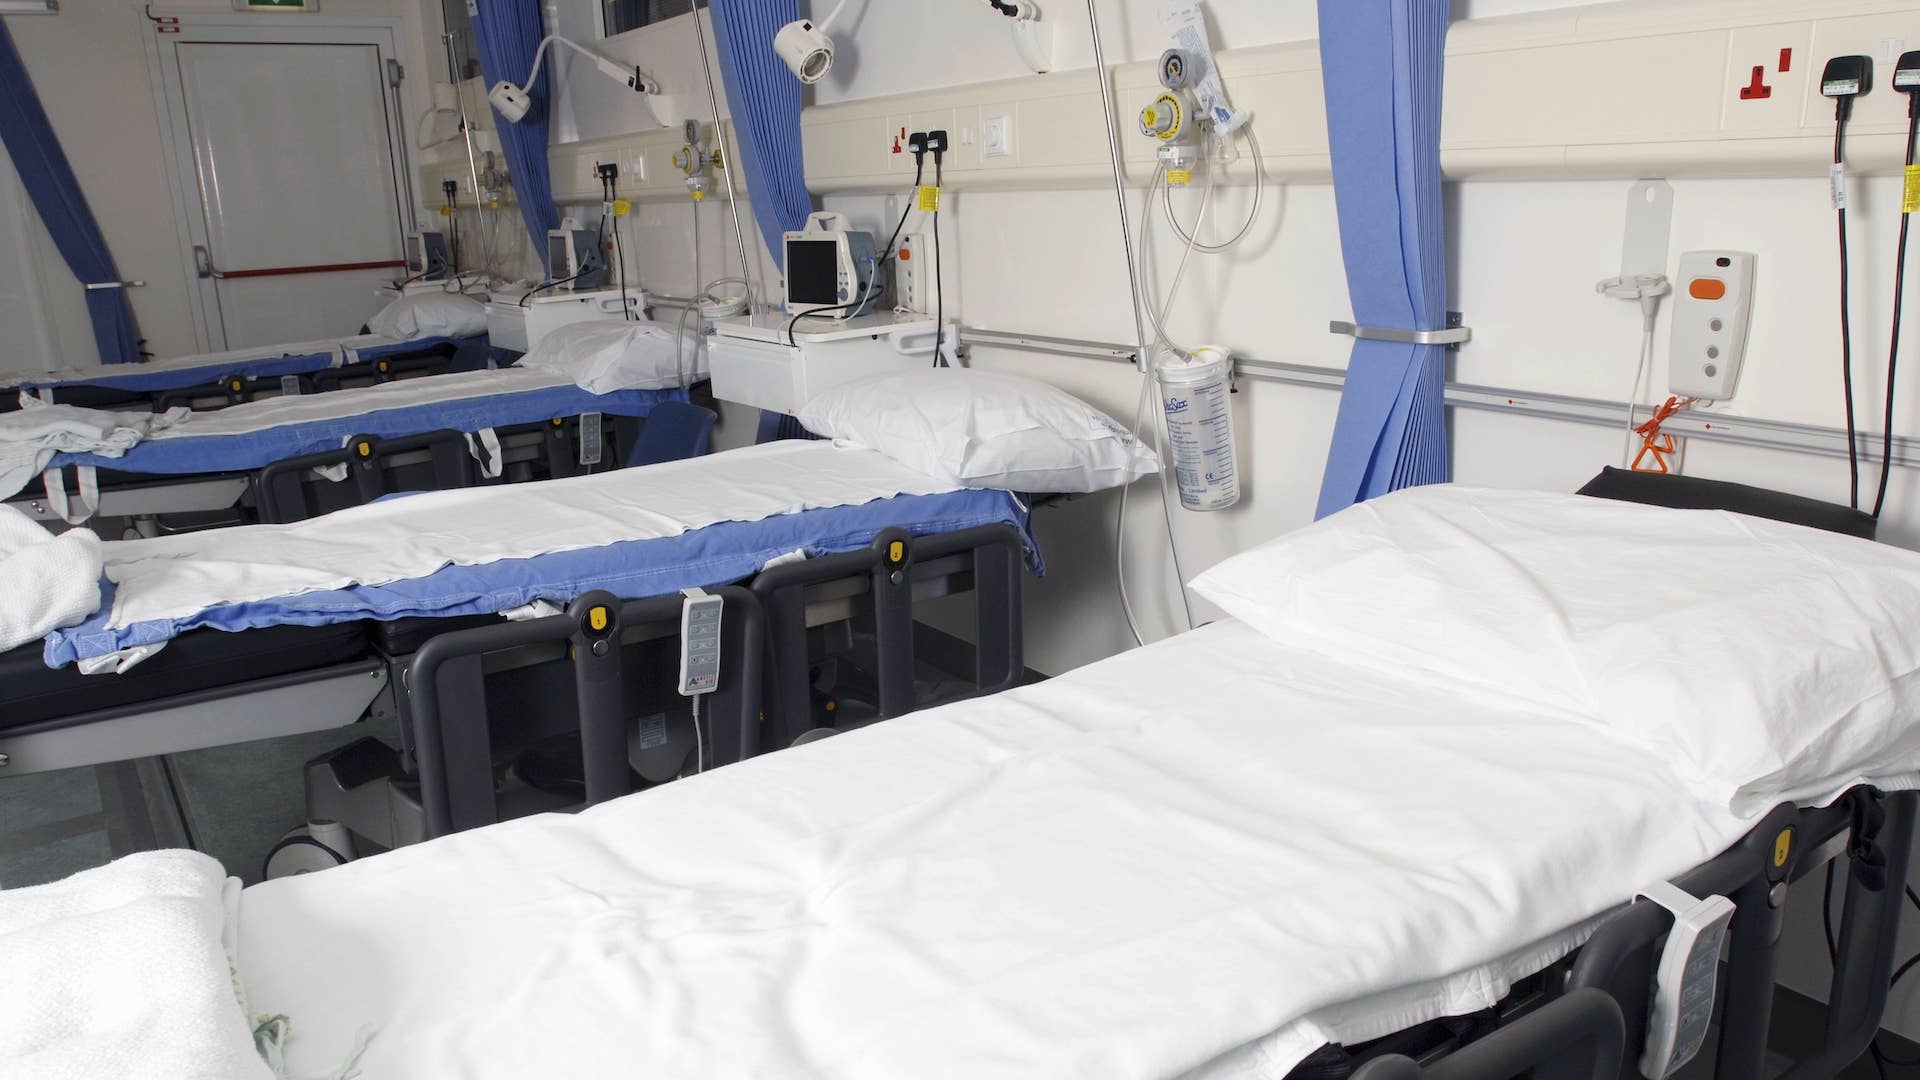 Photograph of a room in a hospital